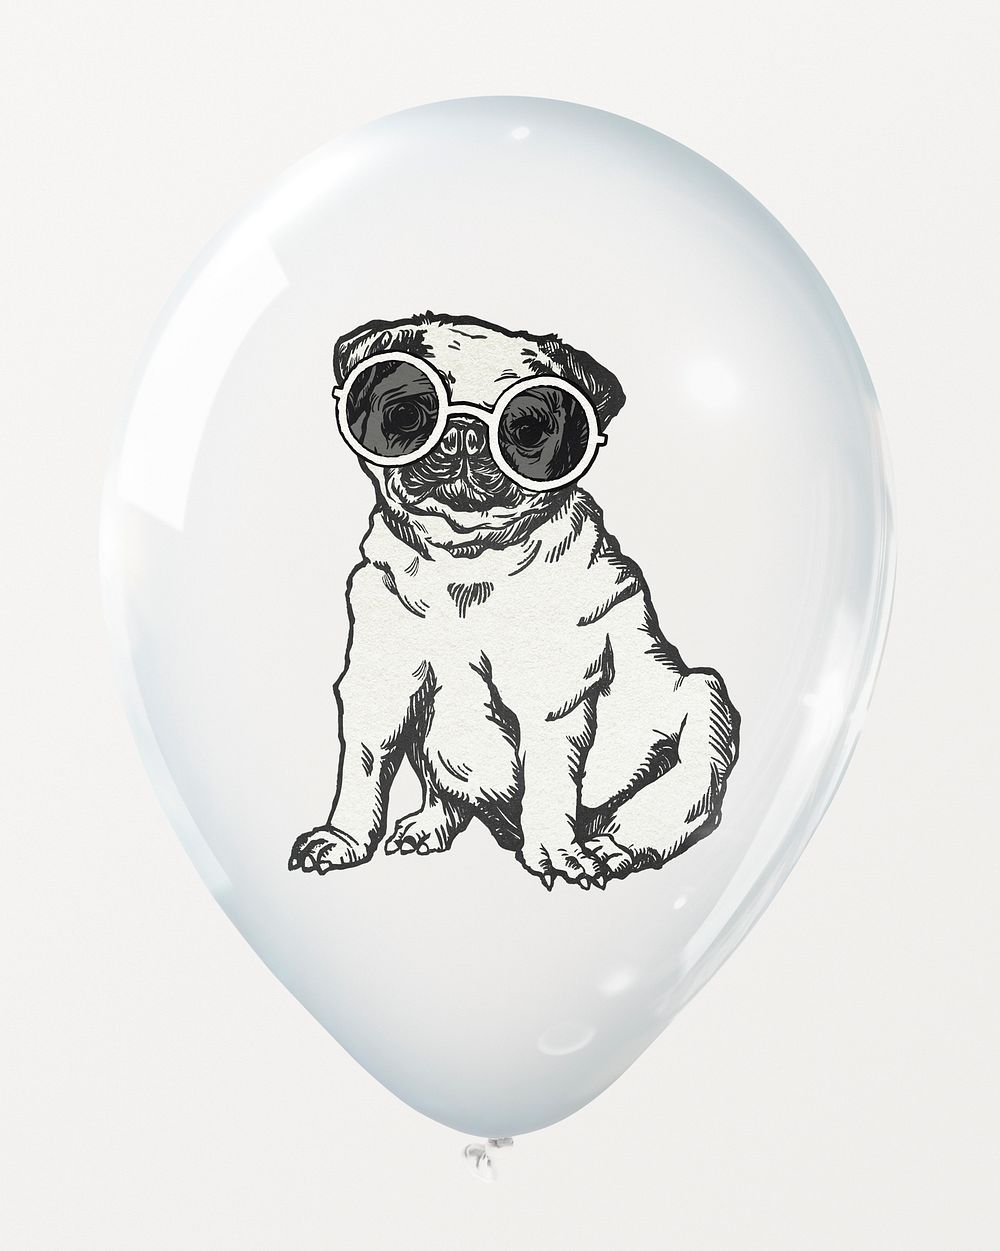 Pug wearing sunglasses, sitting in clear balloon